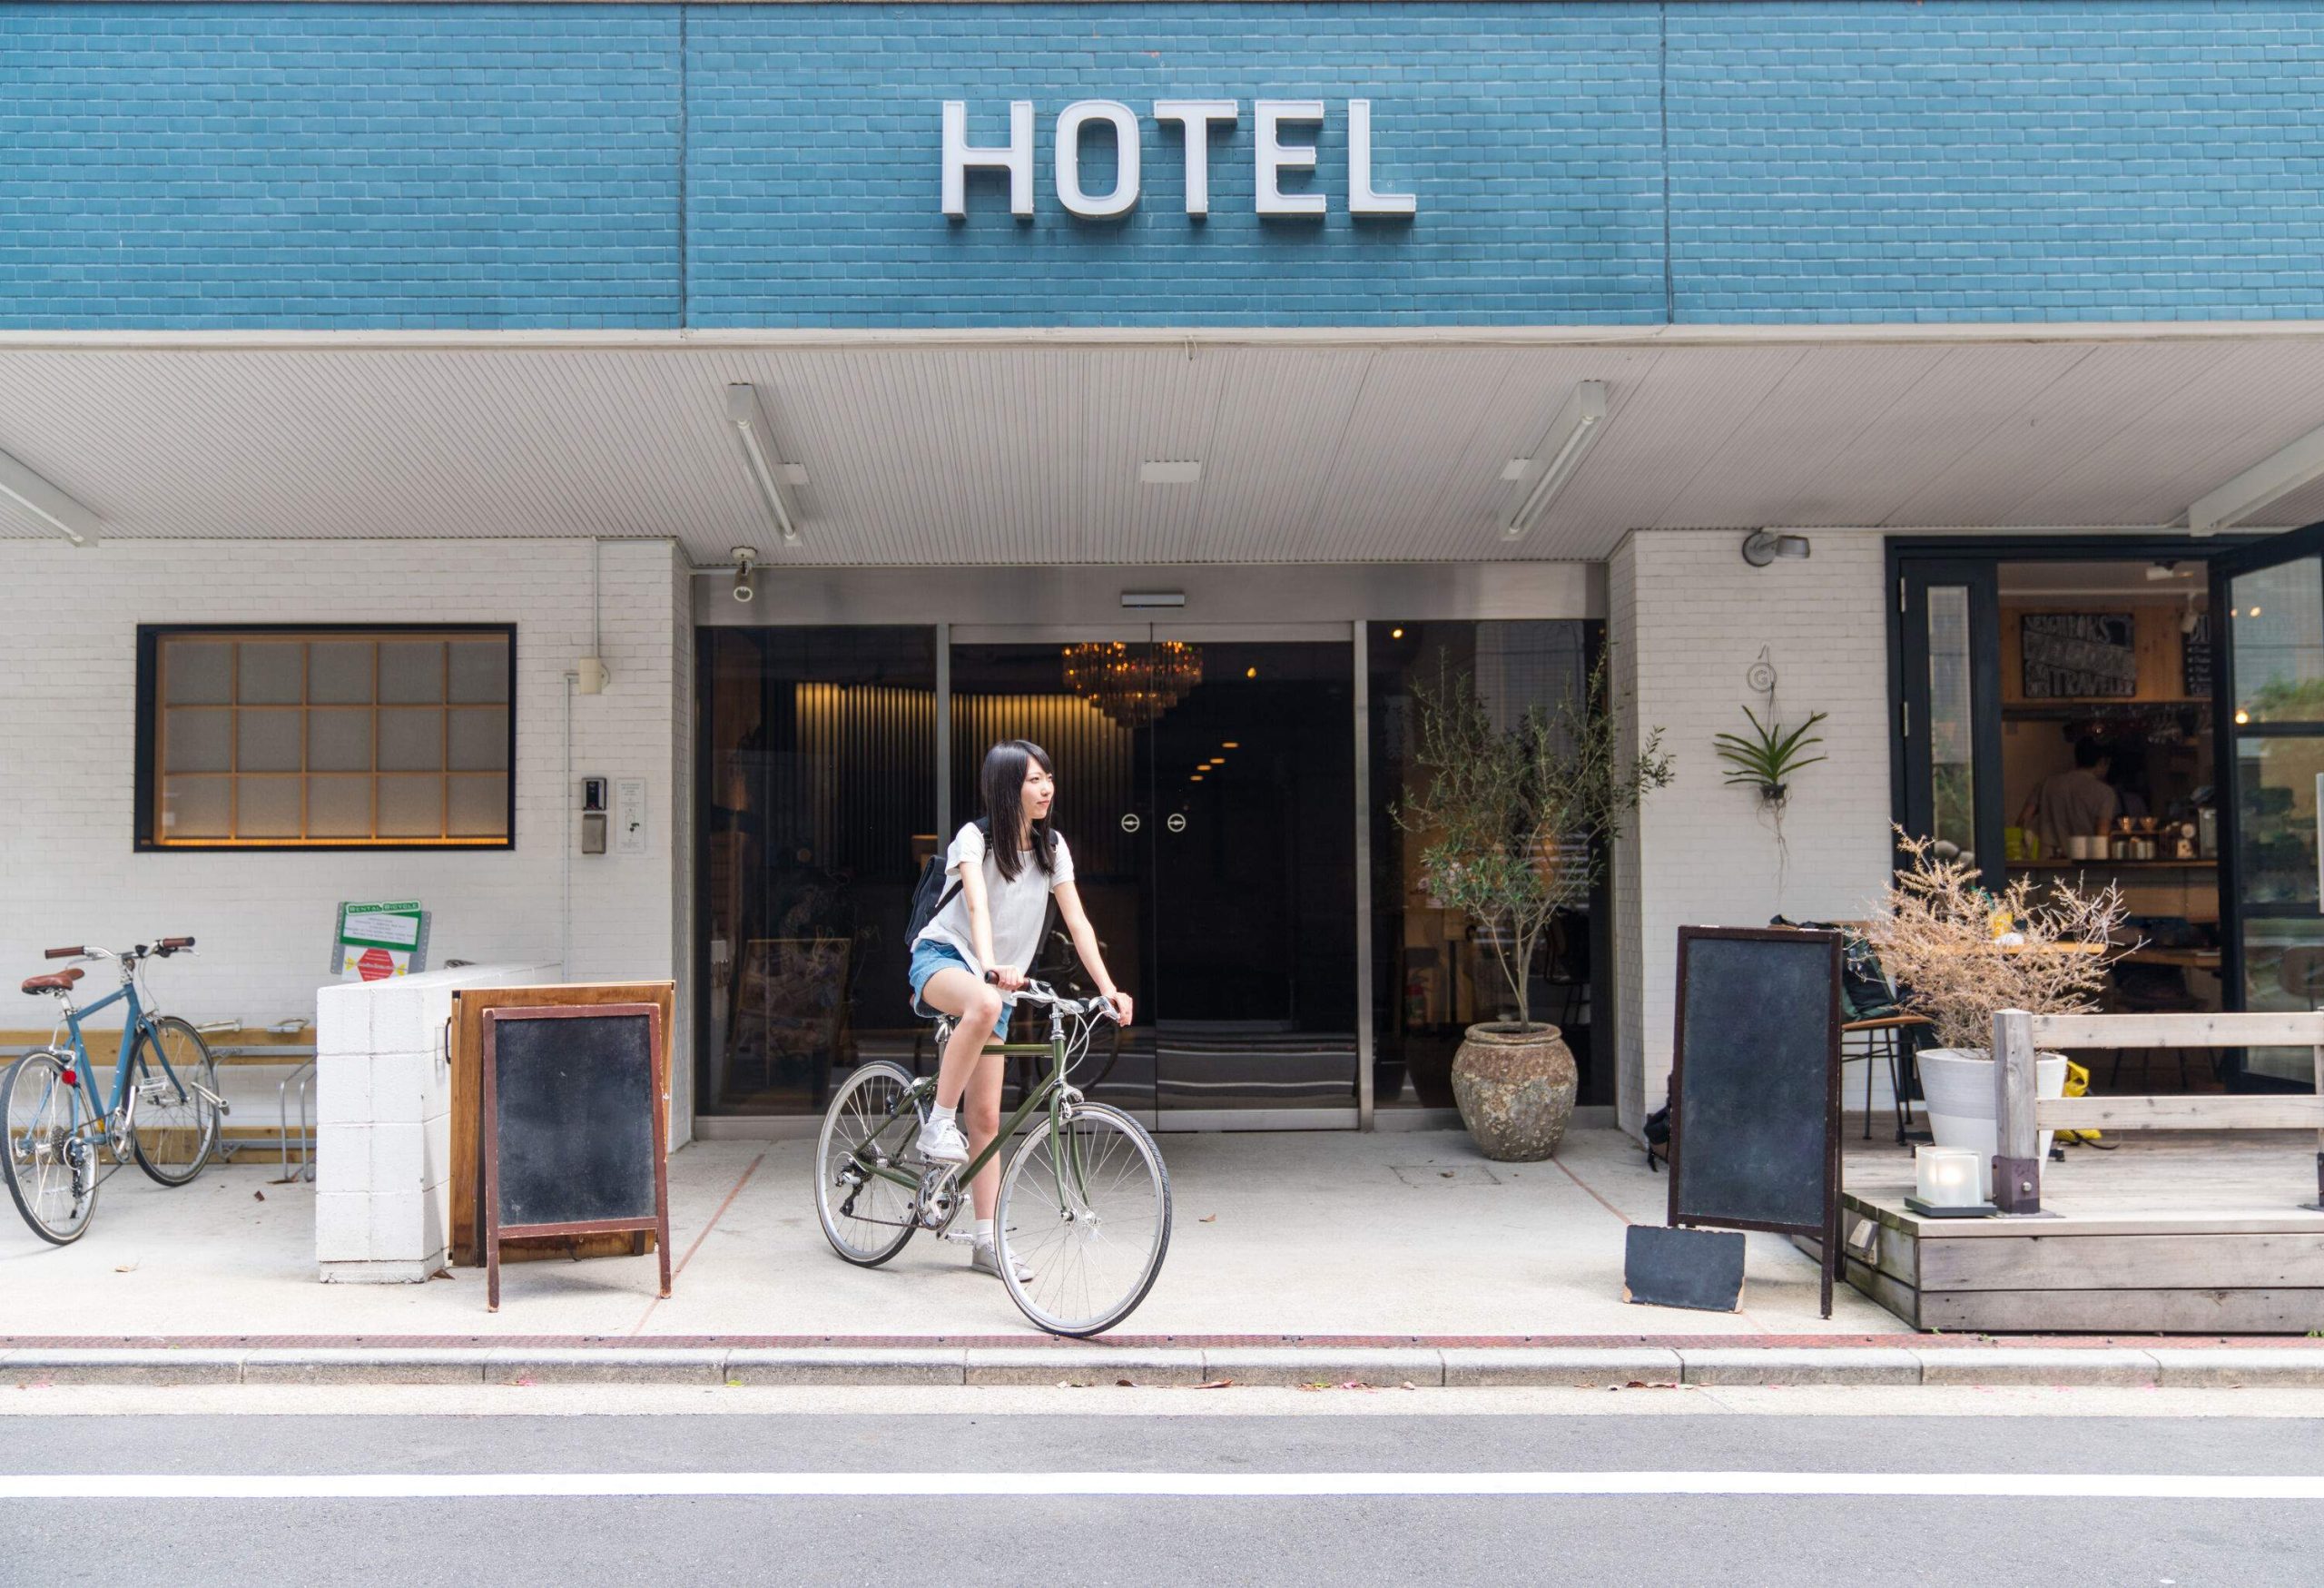 A girl rides on a bicycle at the entrance of a hotel.